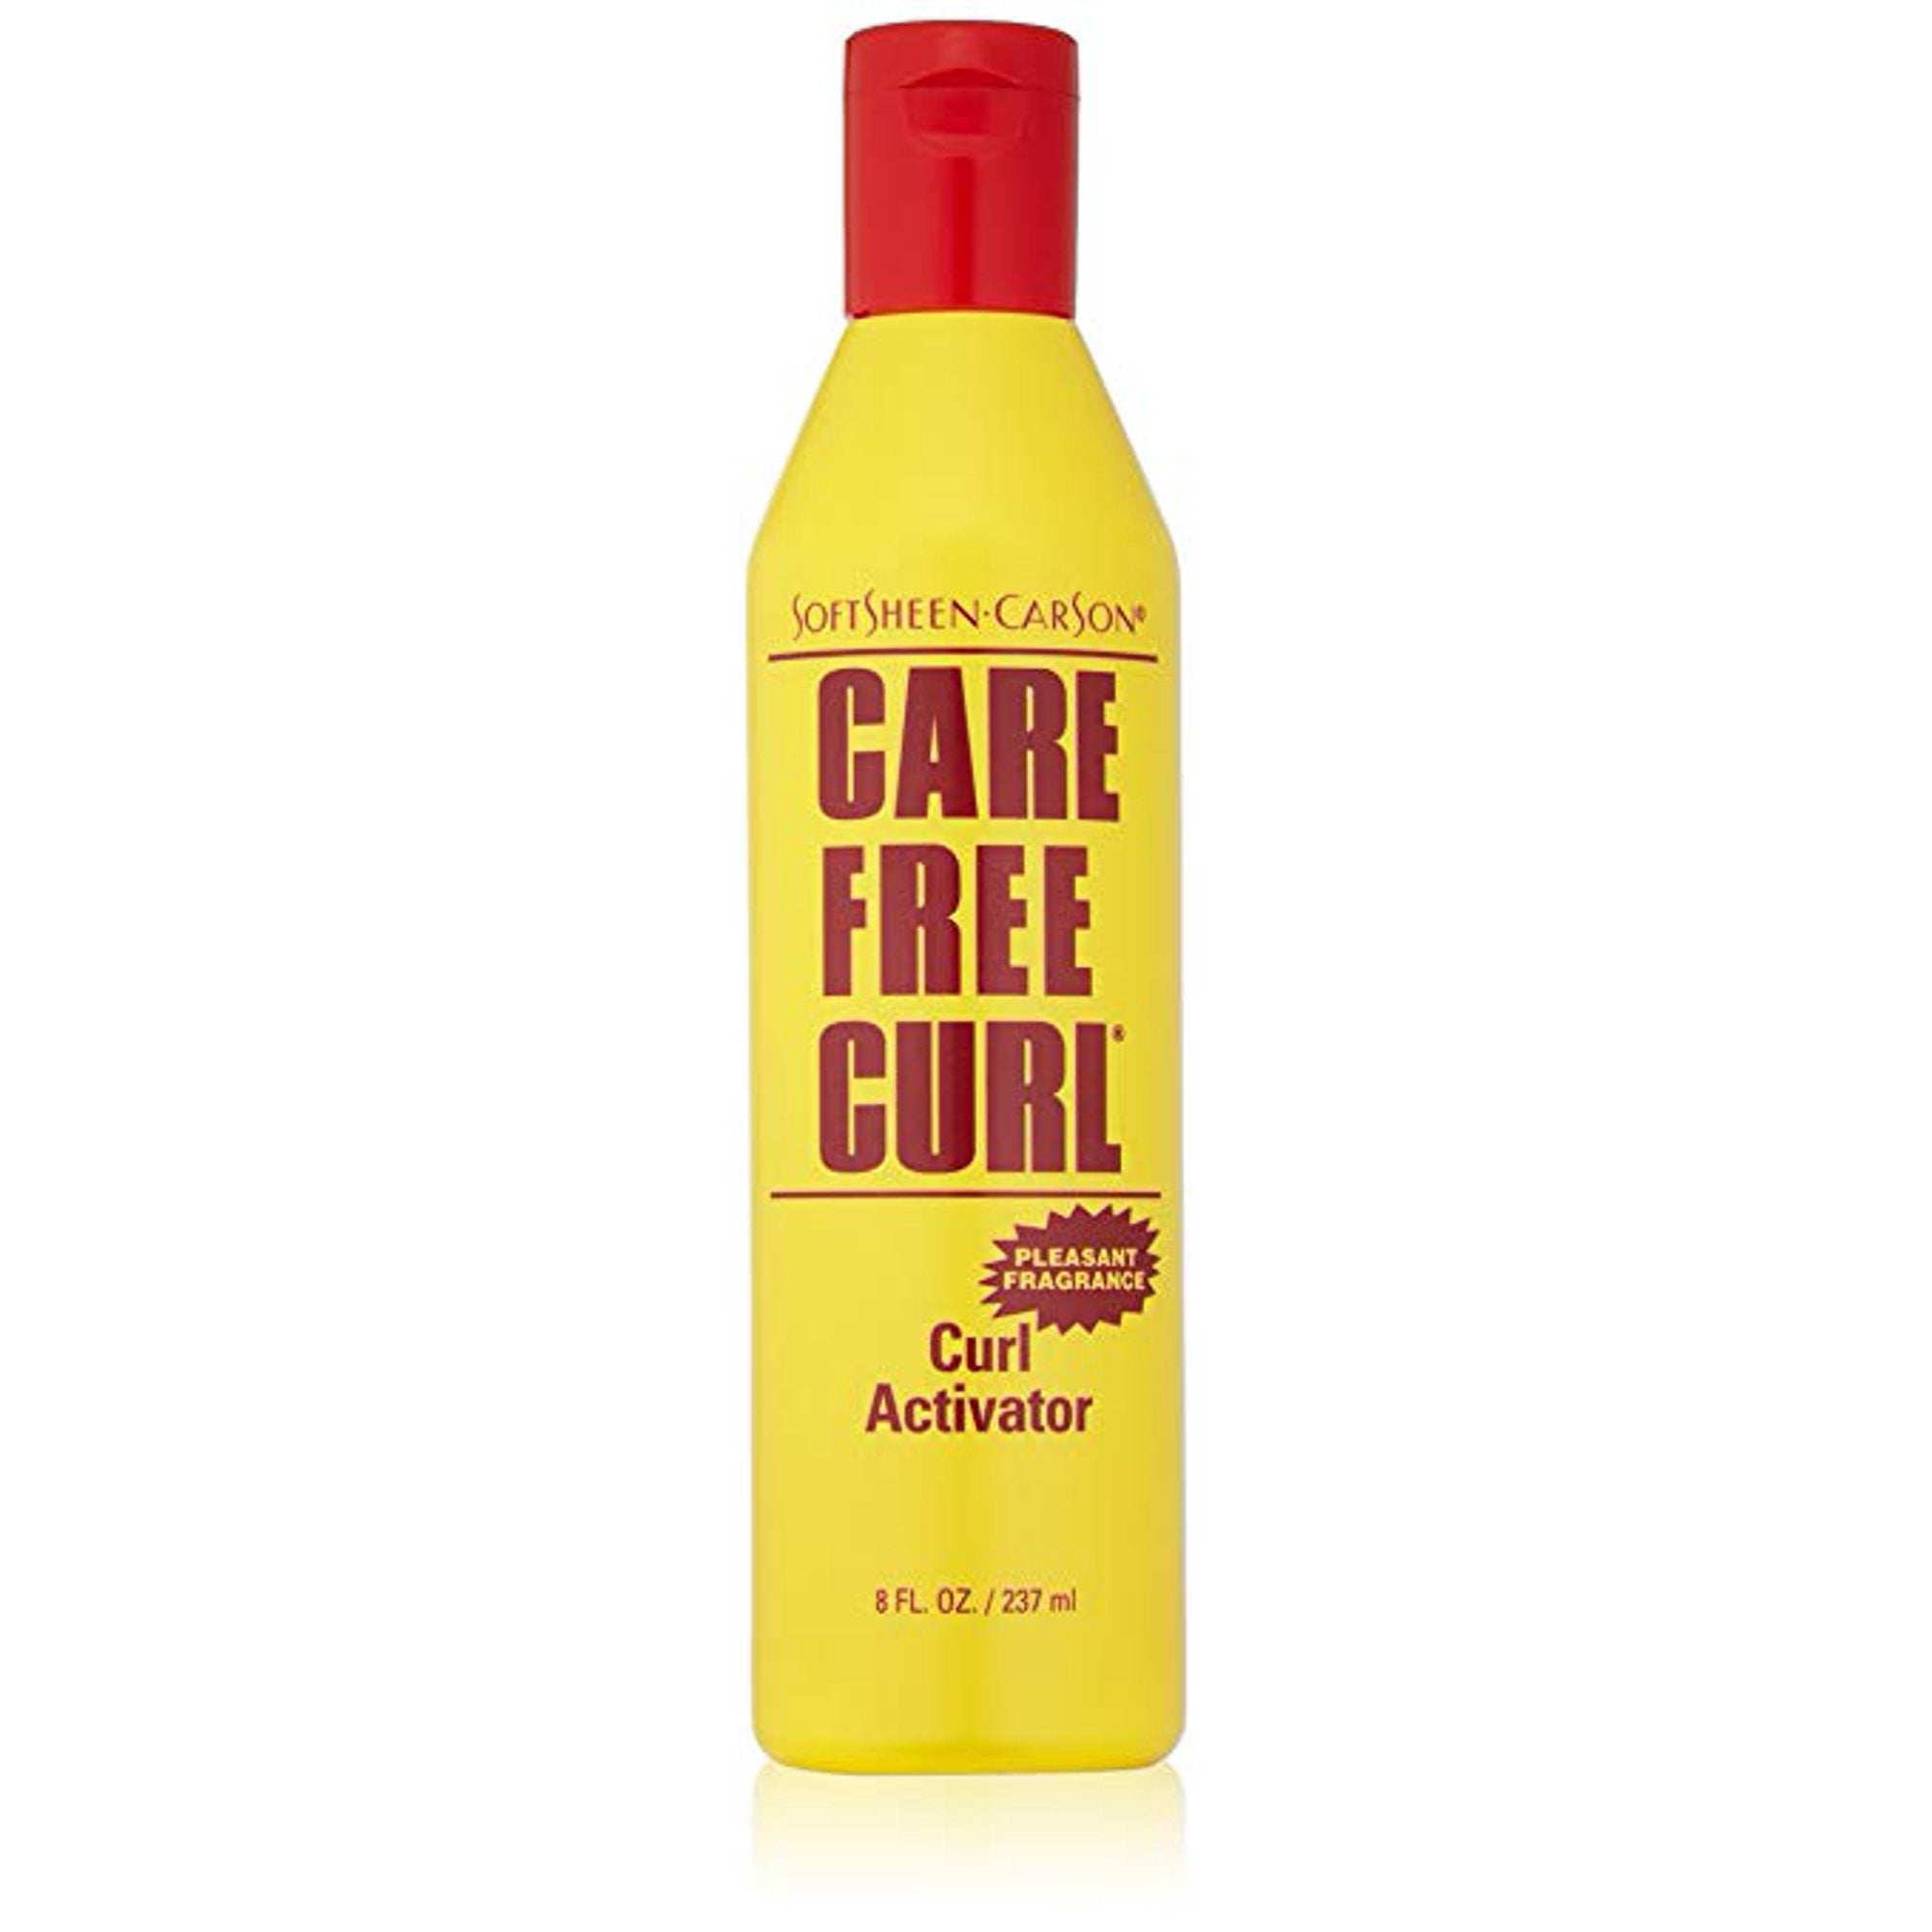 SOFTSHEEN CARSON CARE FREE CURL CURL ACTIVATOR-Softsheen-Carson- Hive Beauty Supply